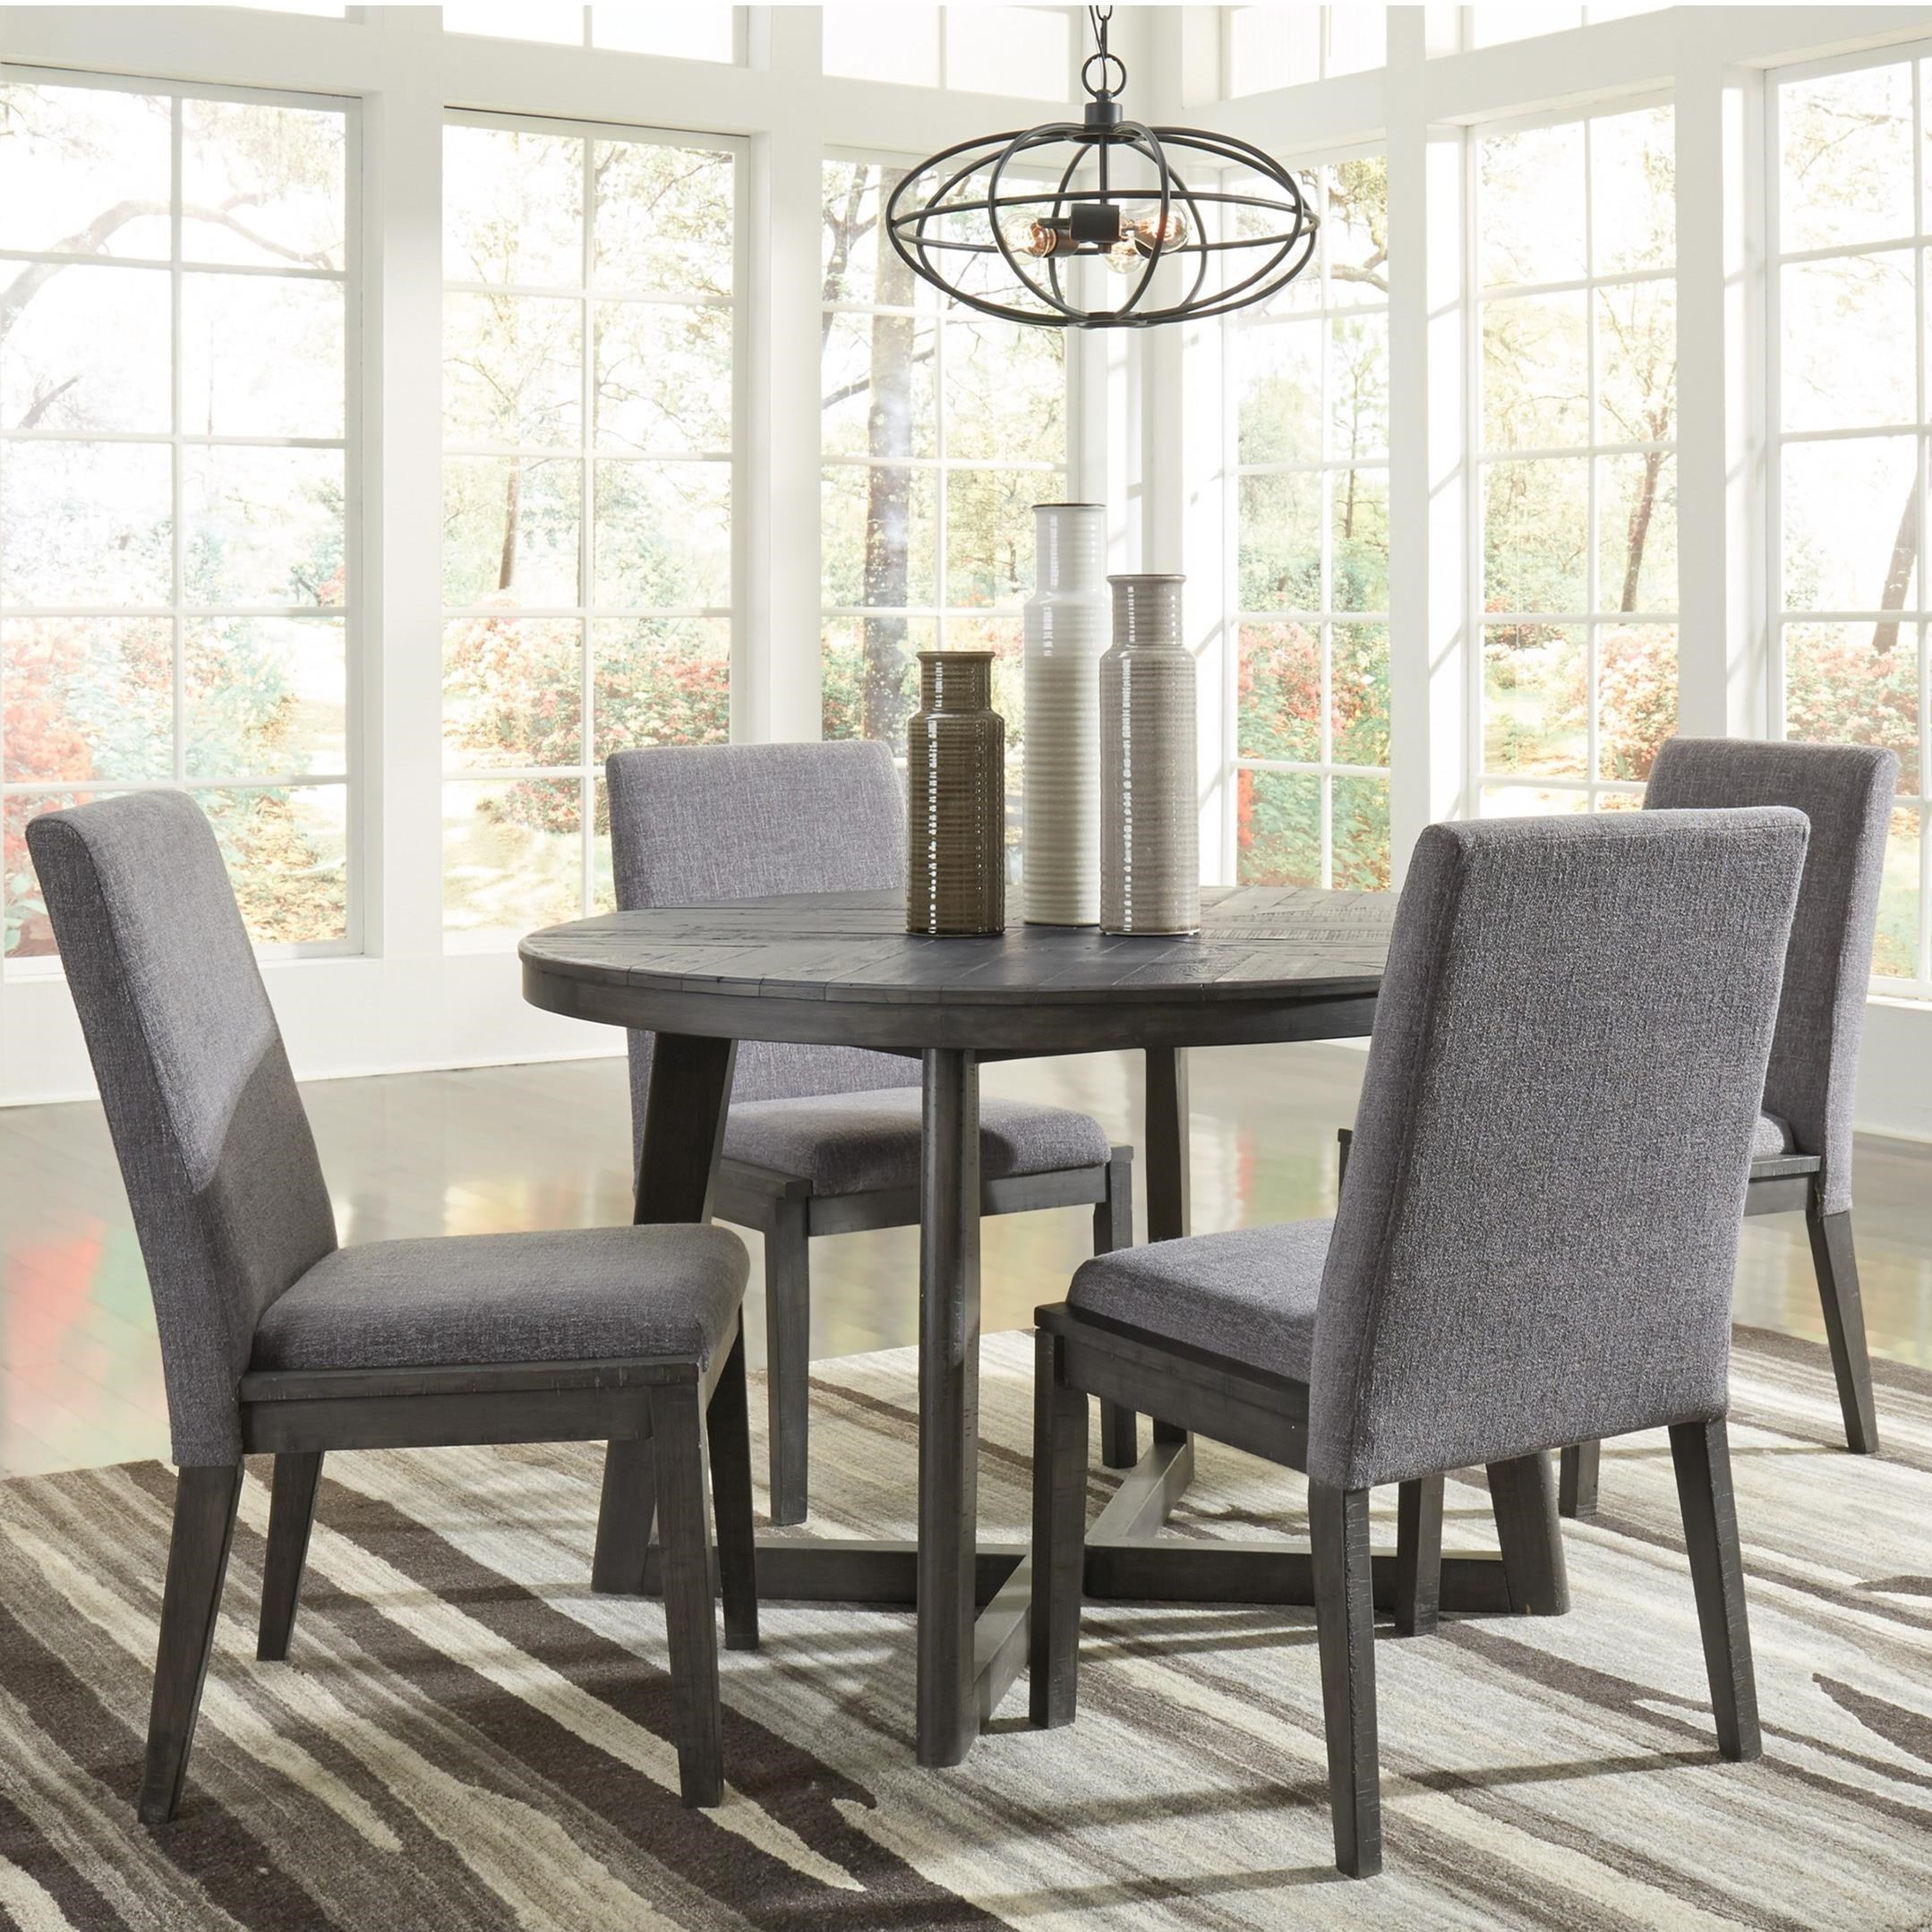 Dining Room Chair D357-01 • Faucet Ideas Site